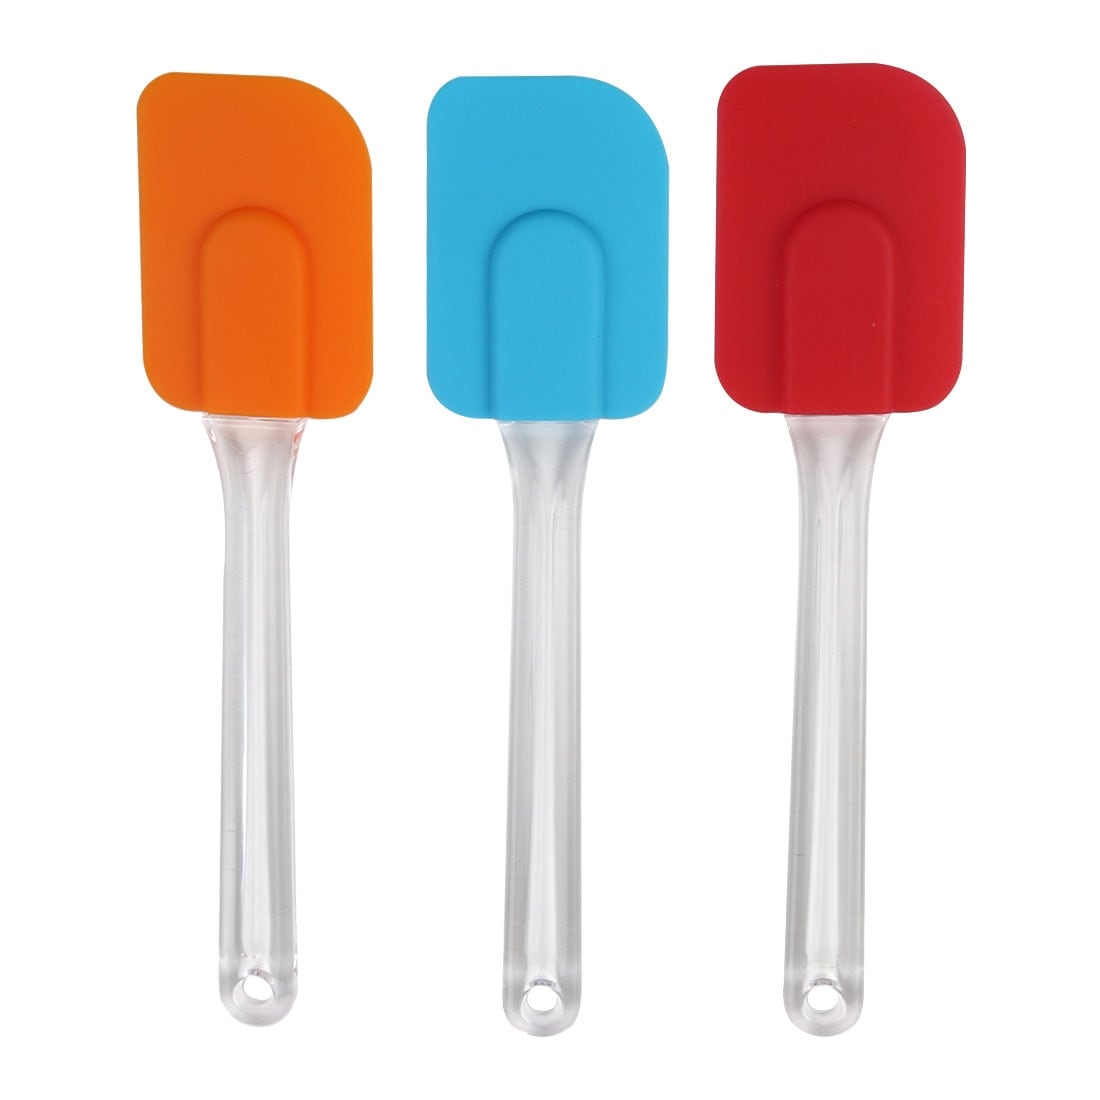 https://ak1.ostkcdn.com/images/products/is/images/direct/93a9bdb811a74d7819c7bb9f2a8c10f76c97f080/Flexible-Silicone-Spatula-Set-Heat-Resistant-Non-Stick.jpg